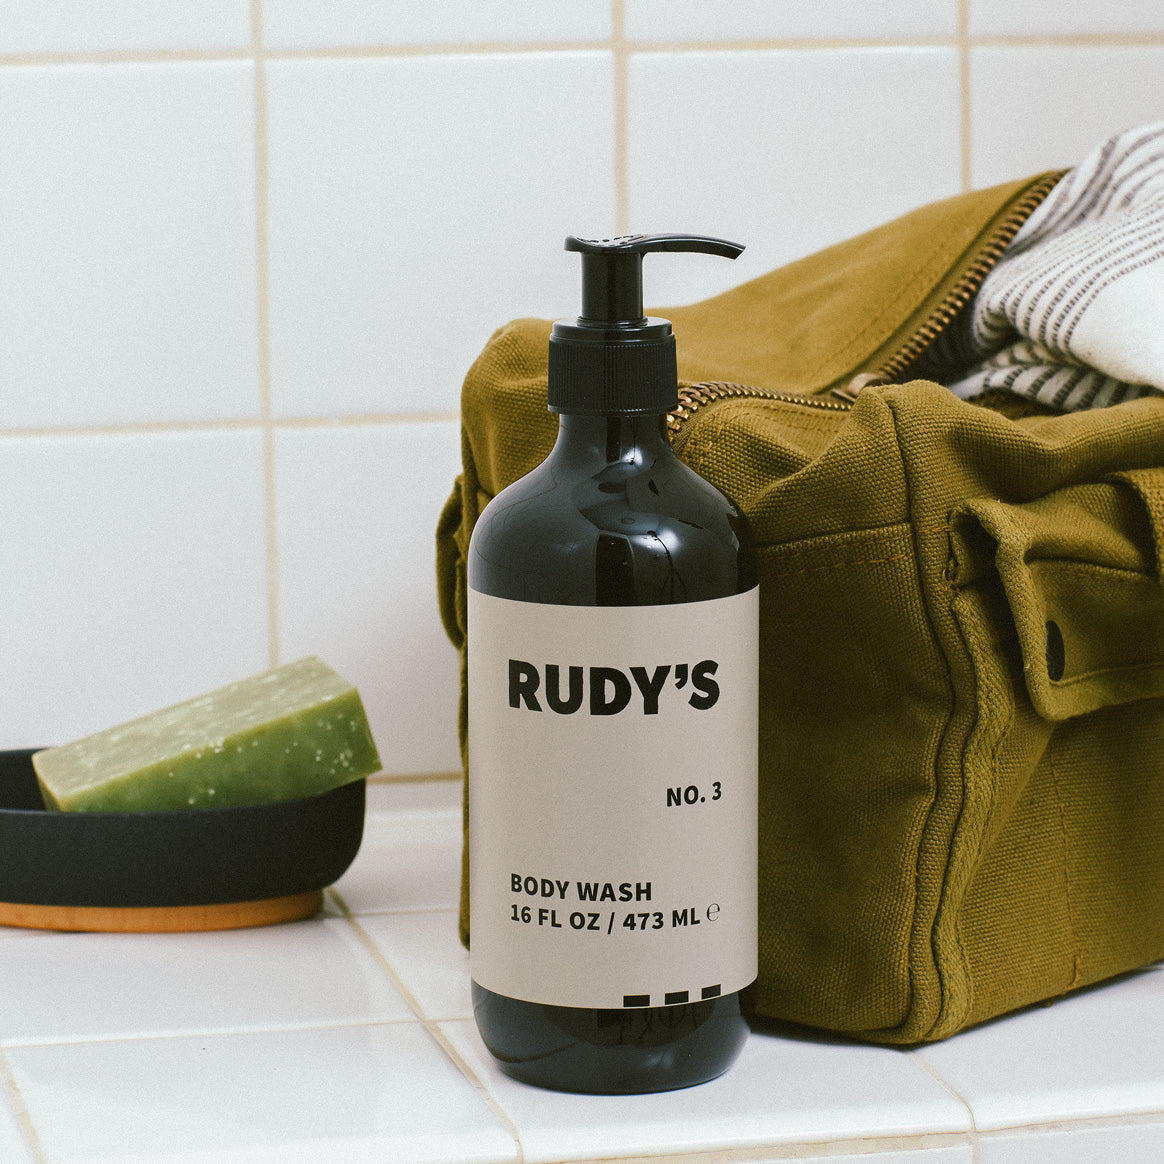 Rudy's Barbershop No. 3 Body Wash in your shower